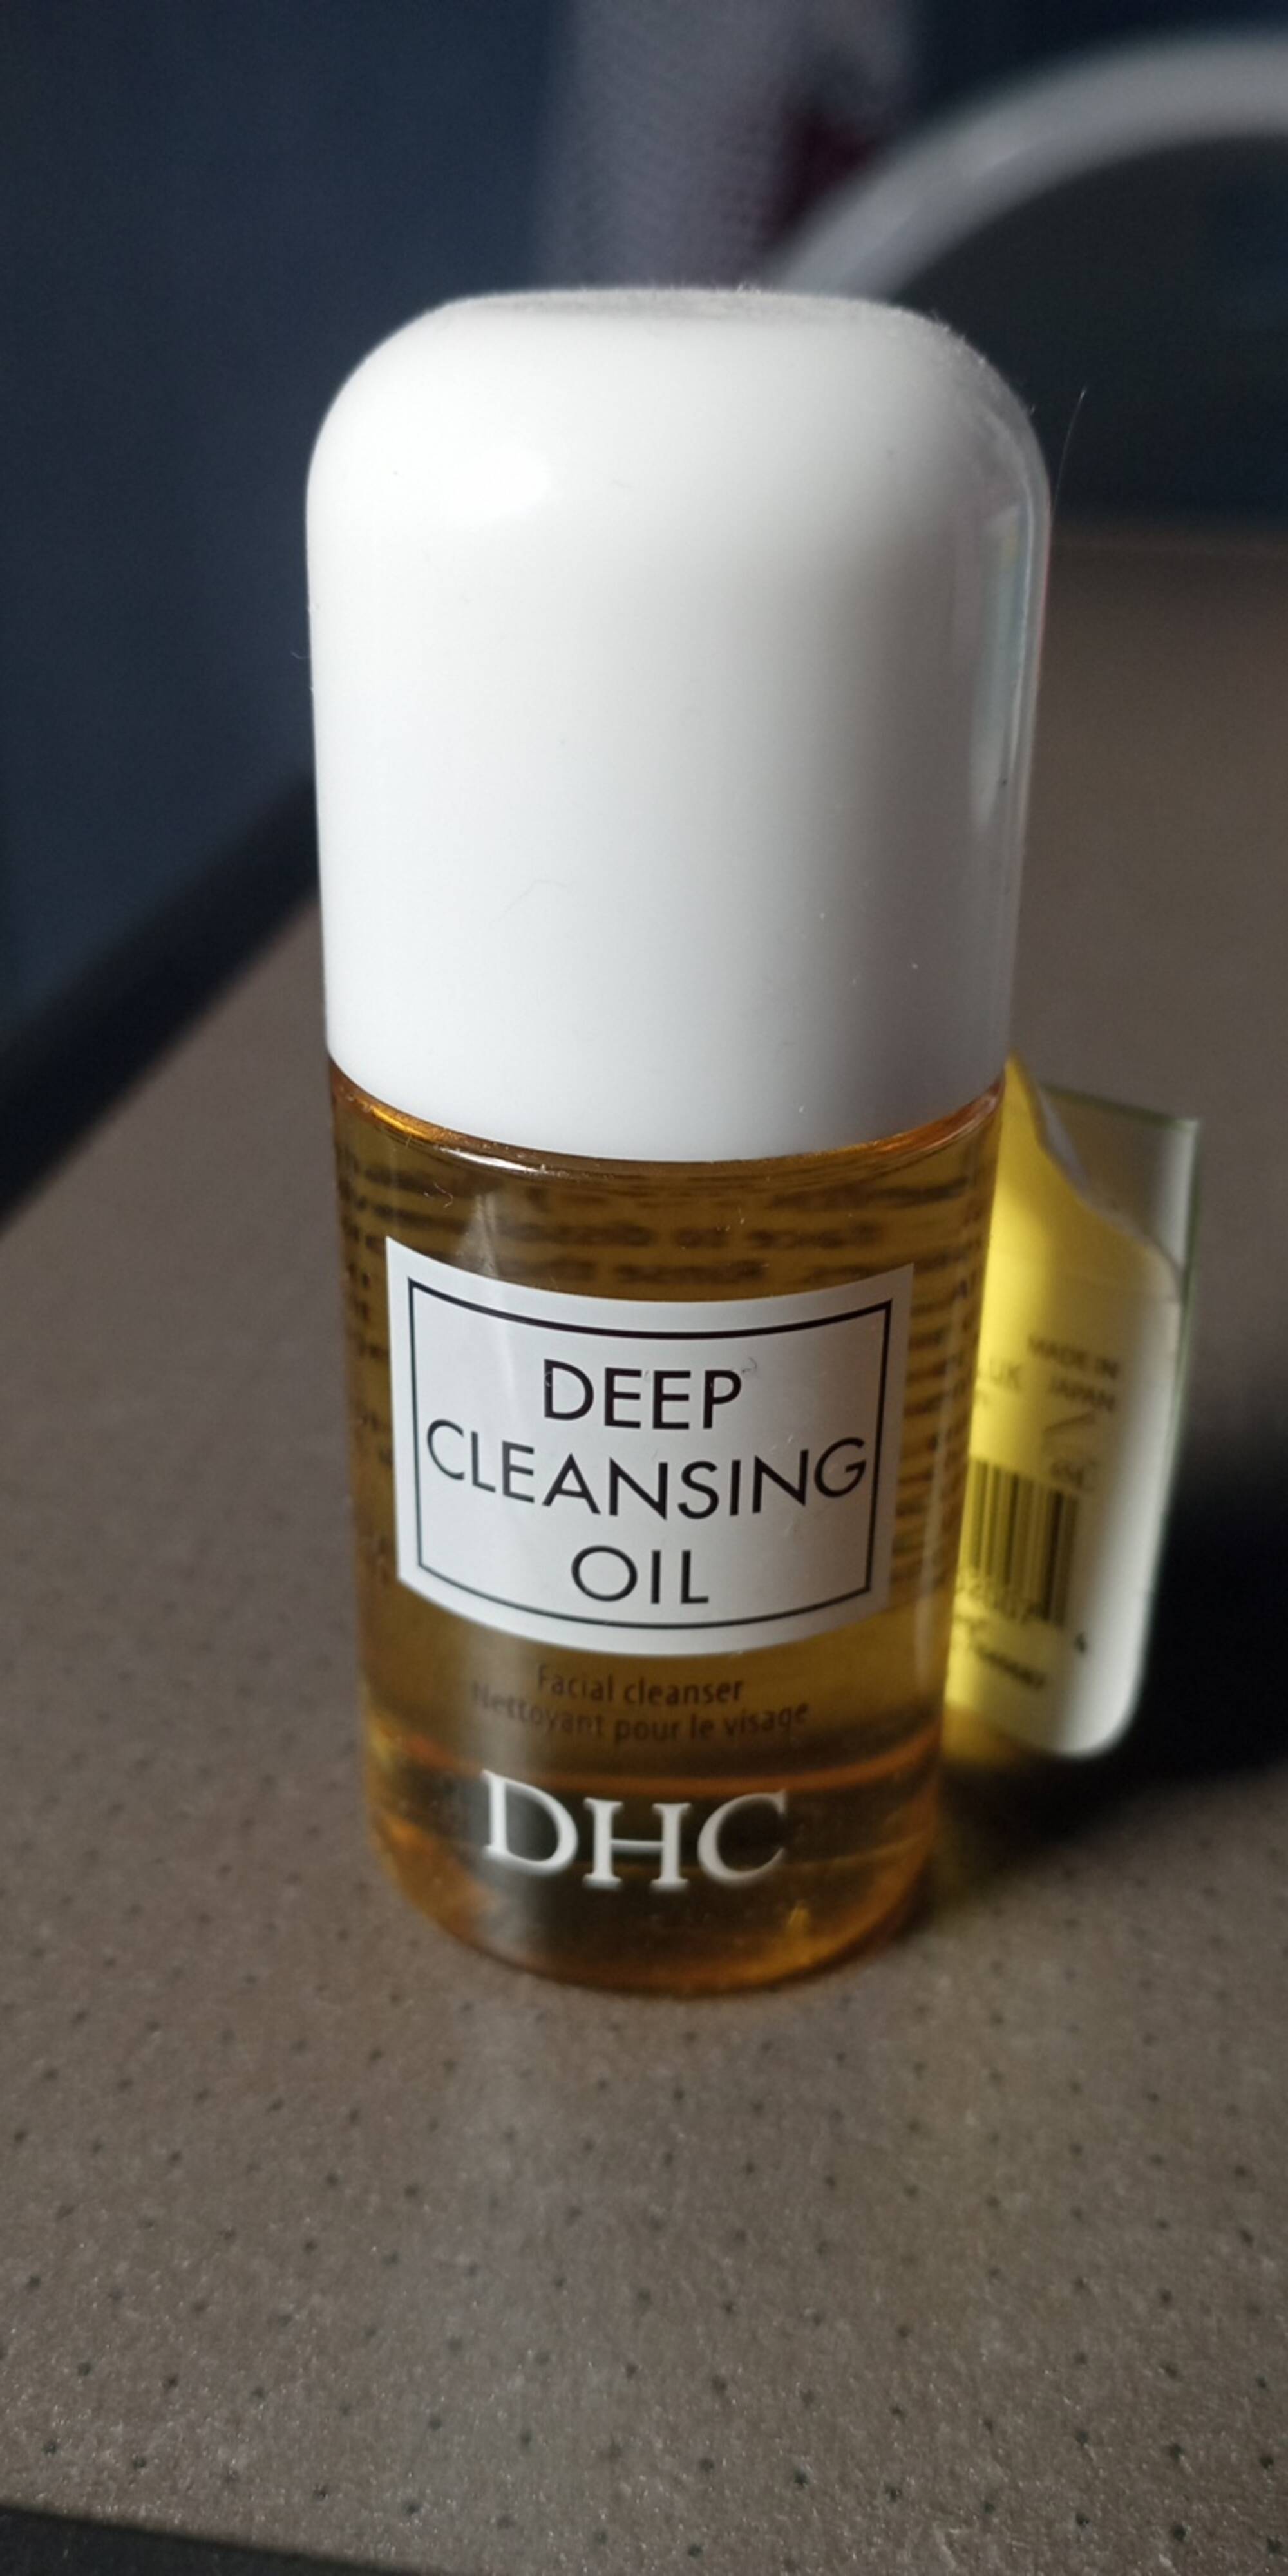 DHC - Deep cleansing oil